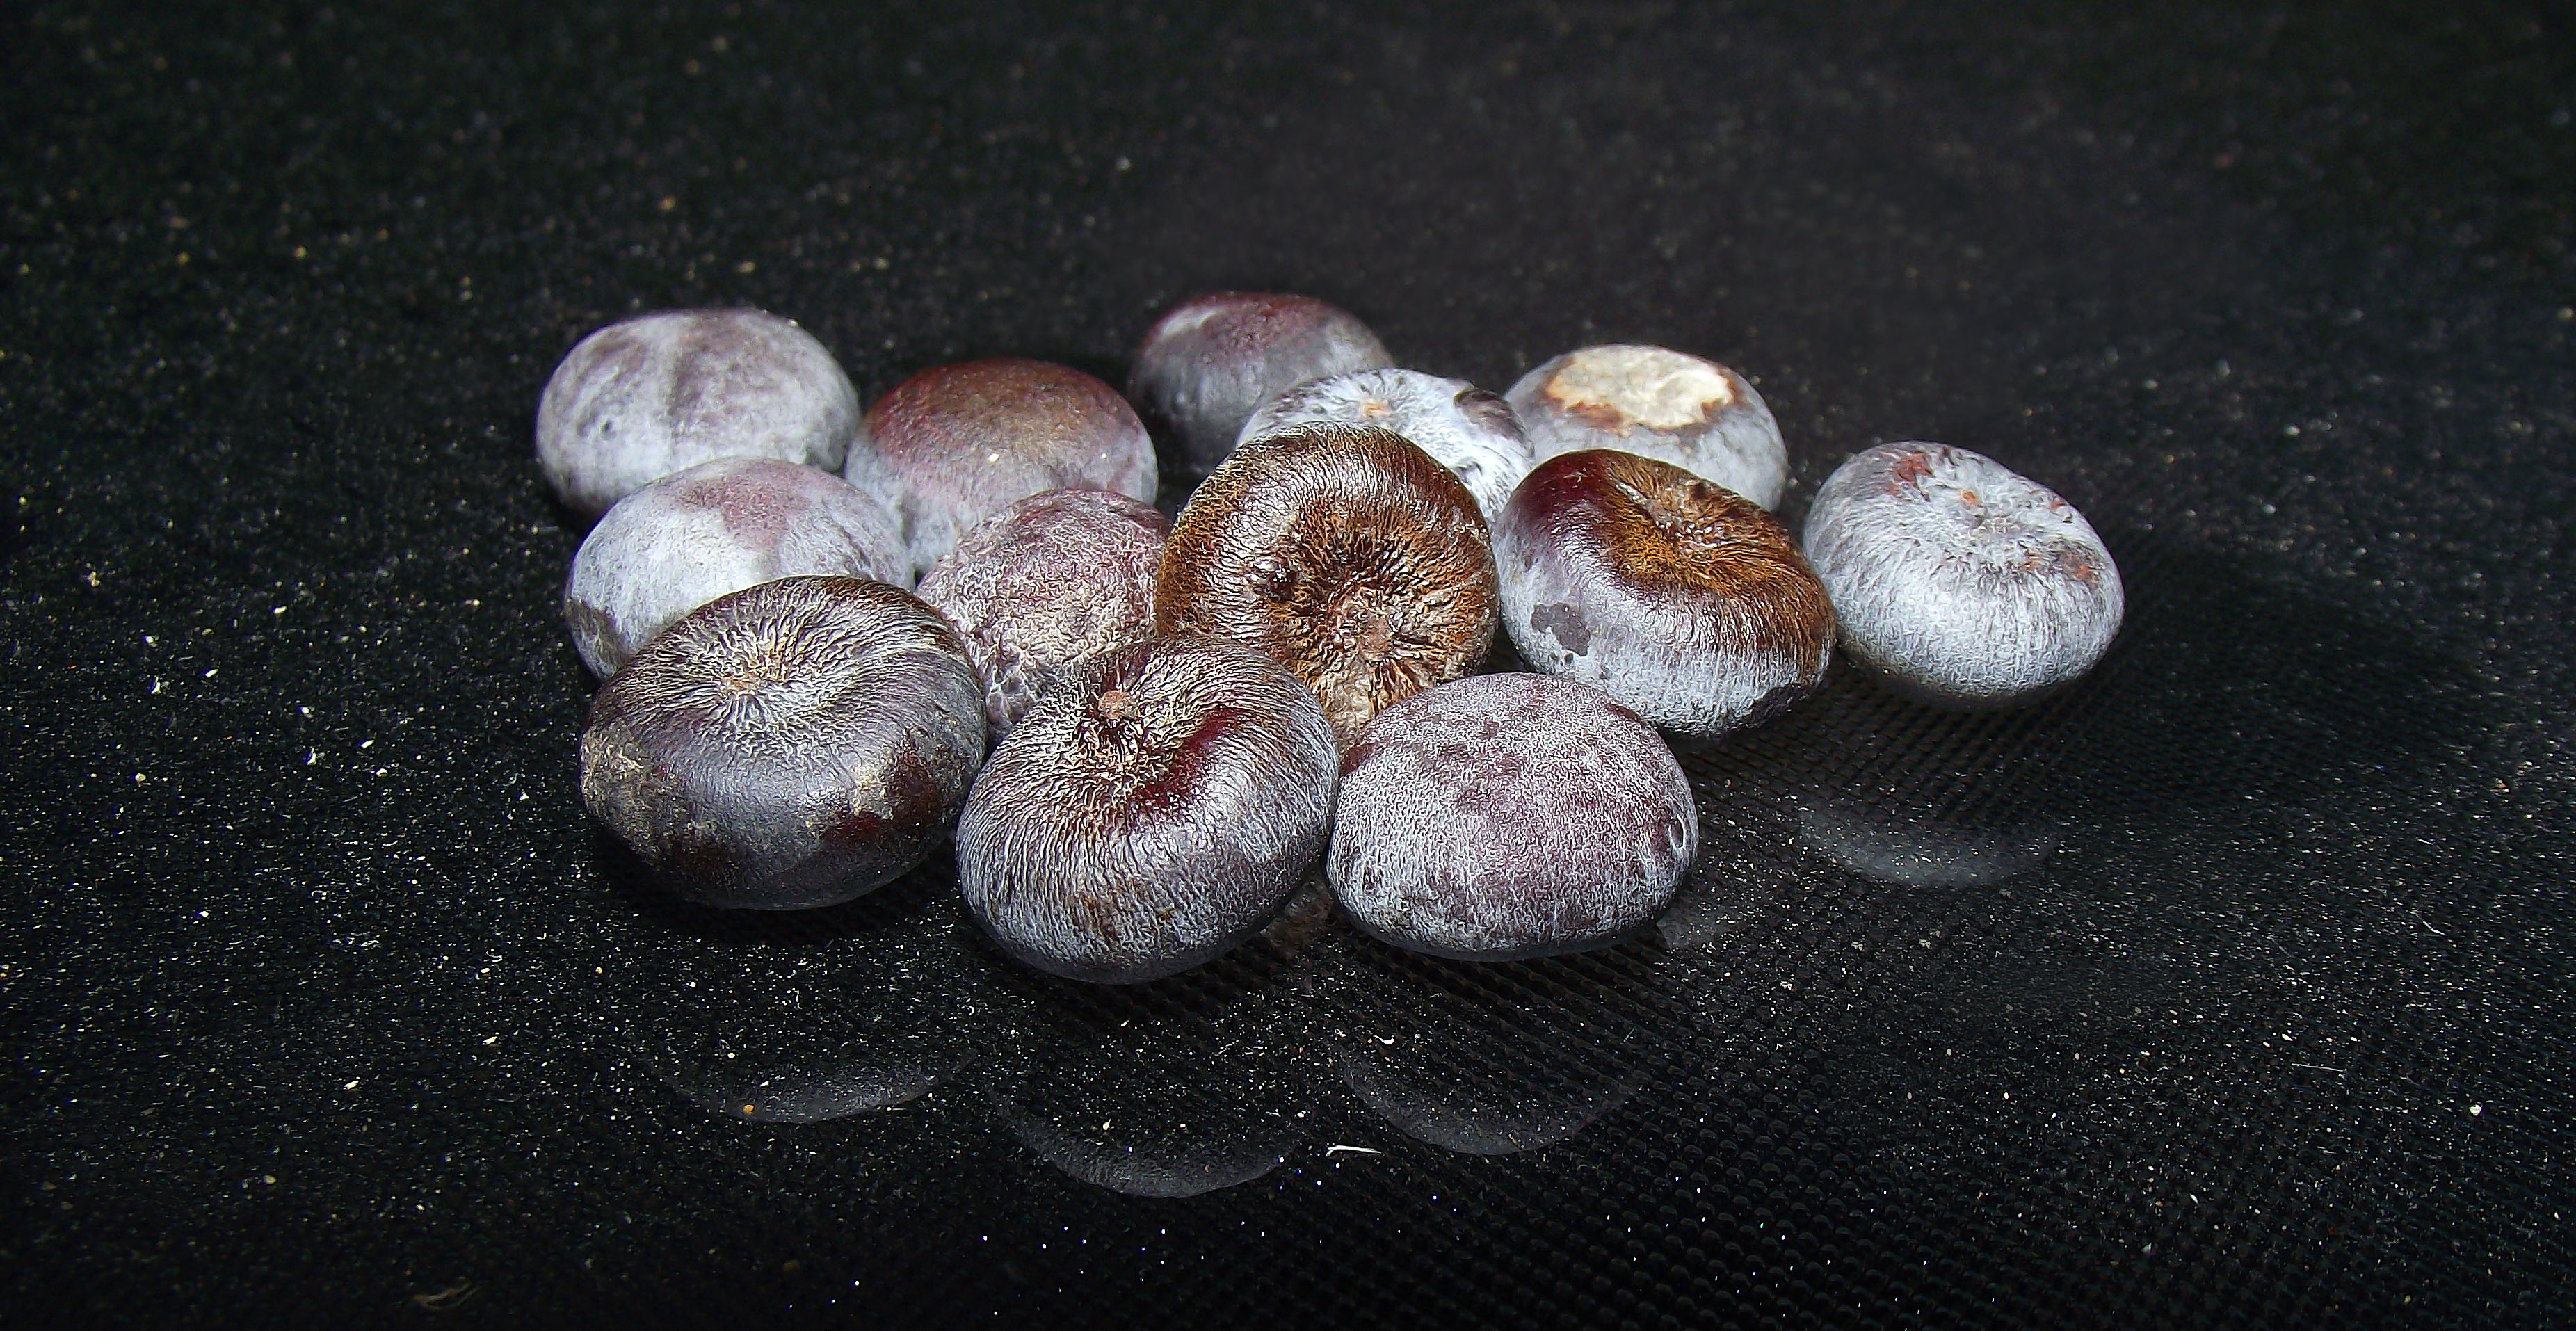 Date Palm seeds July 2010